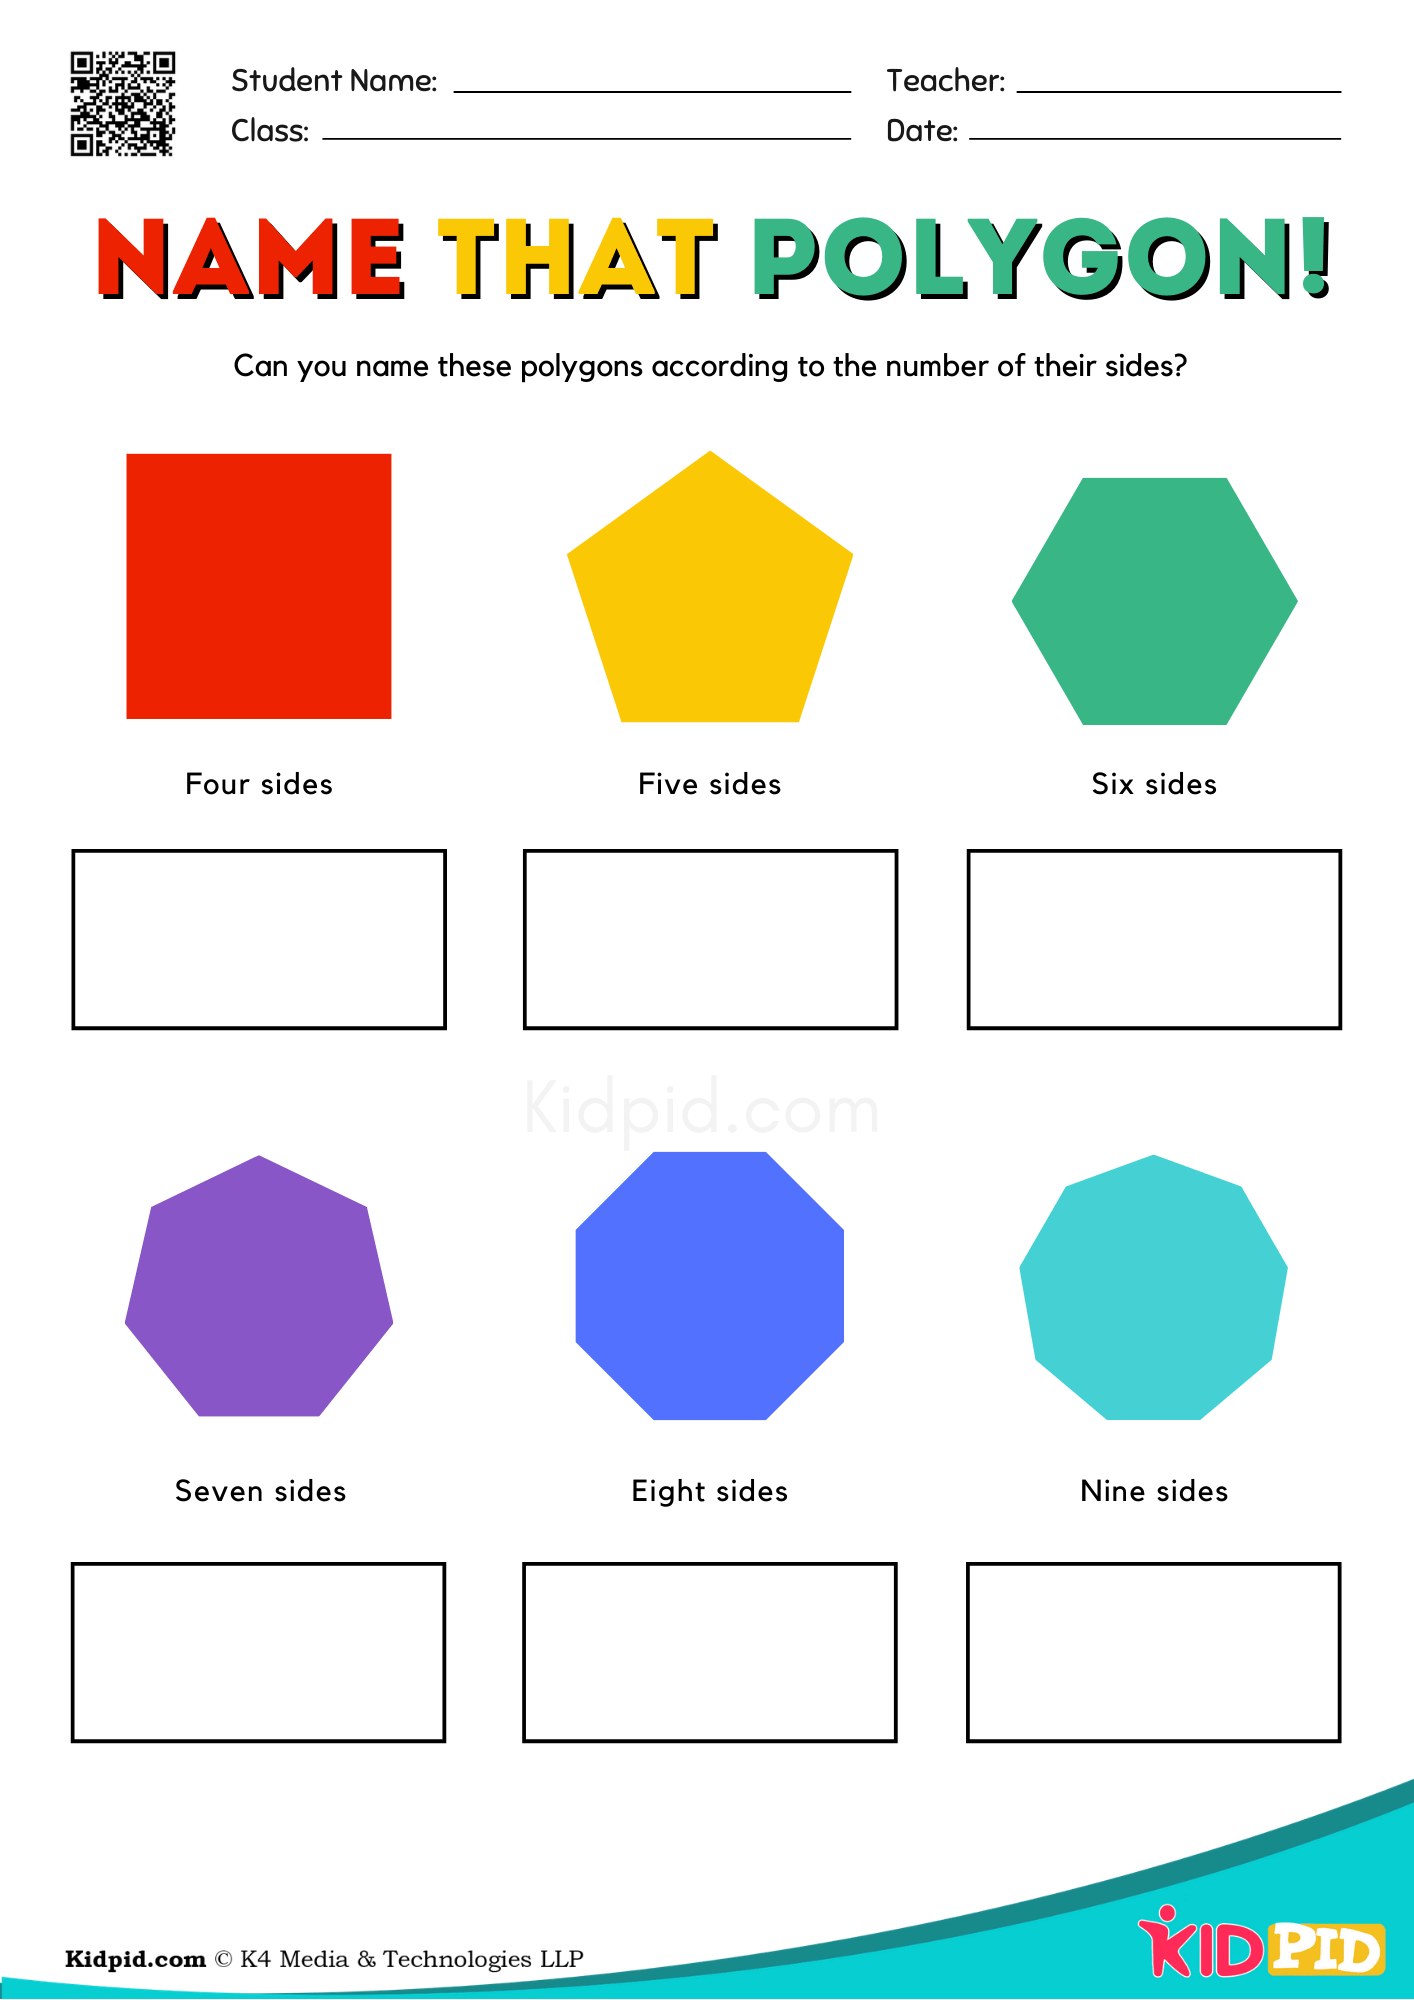 polygon shapes and names